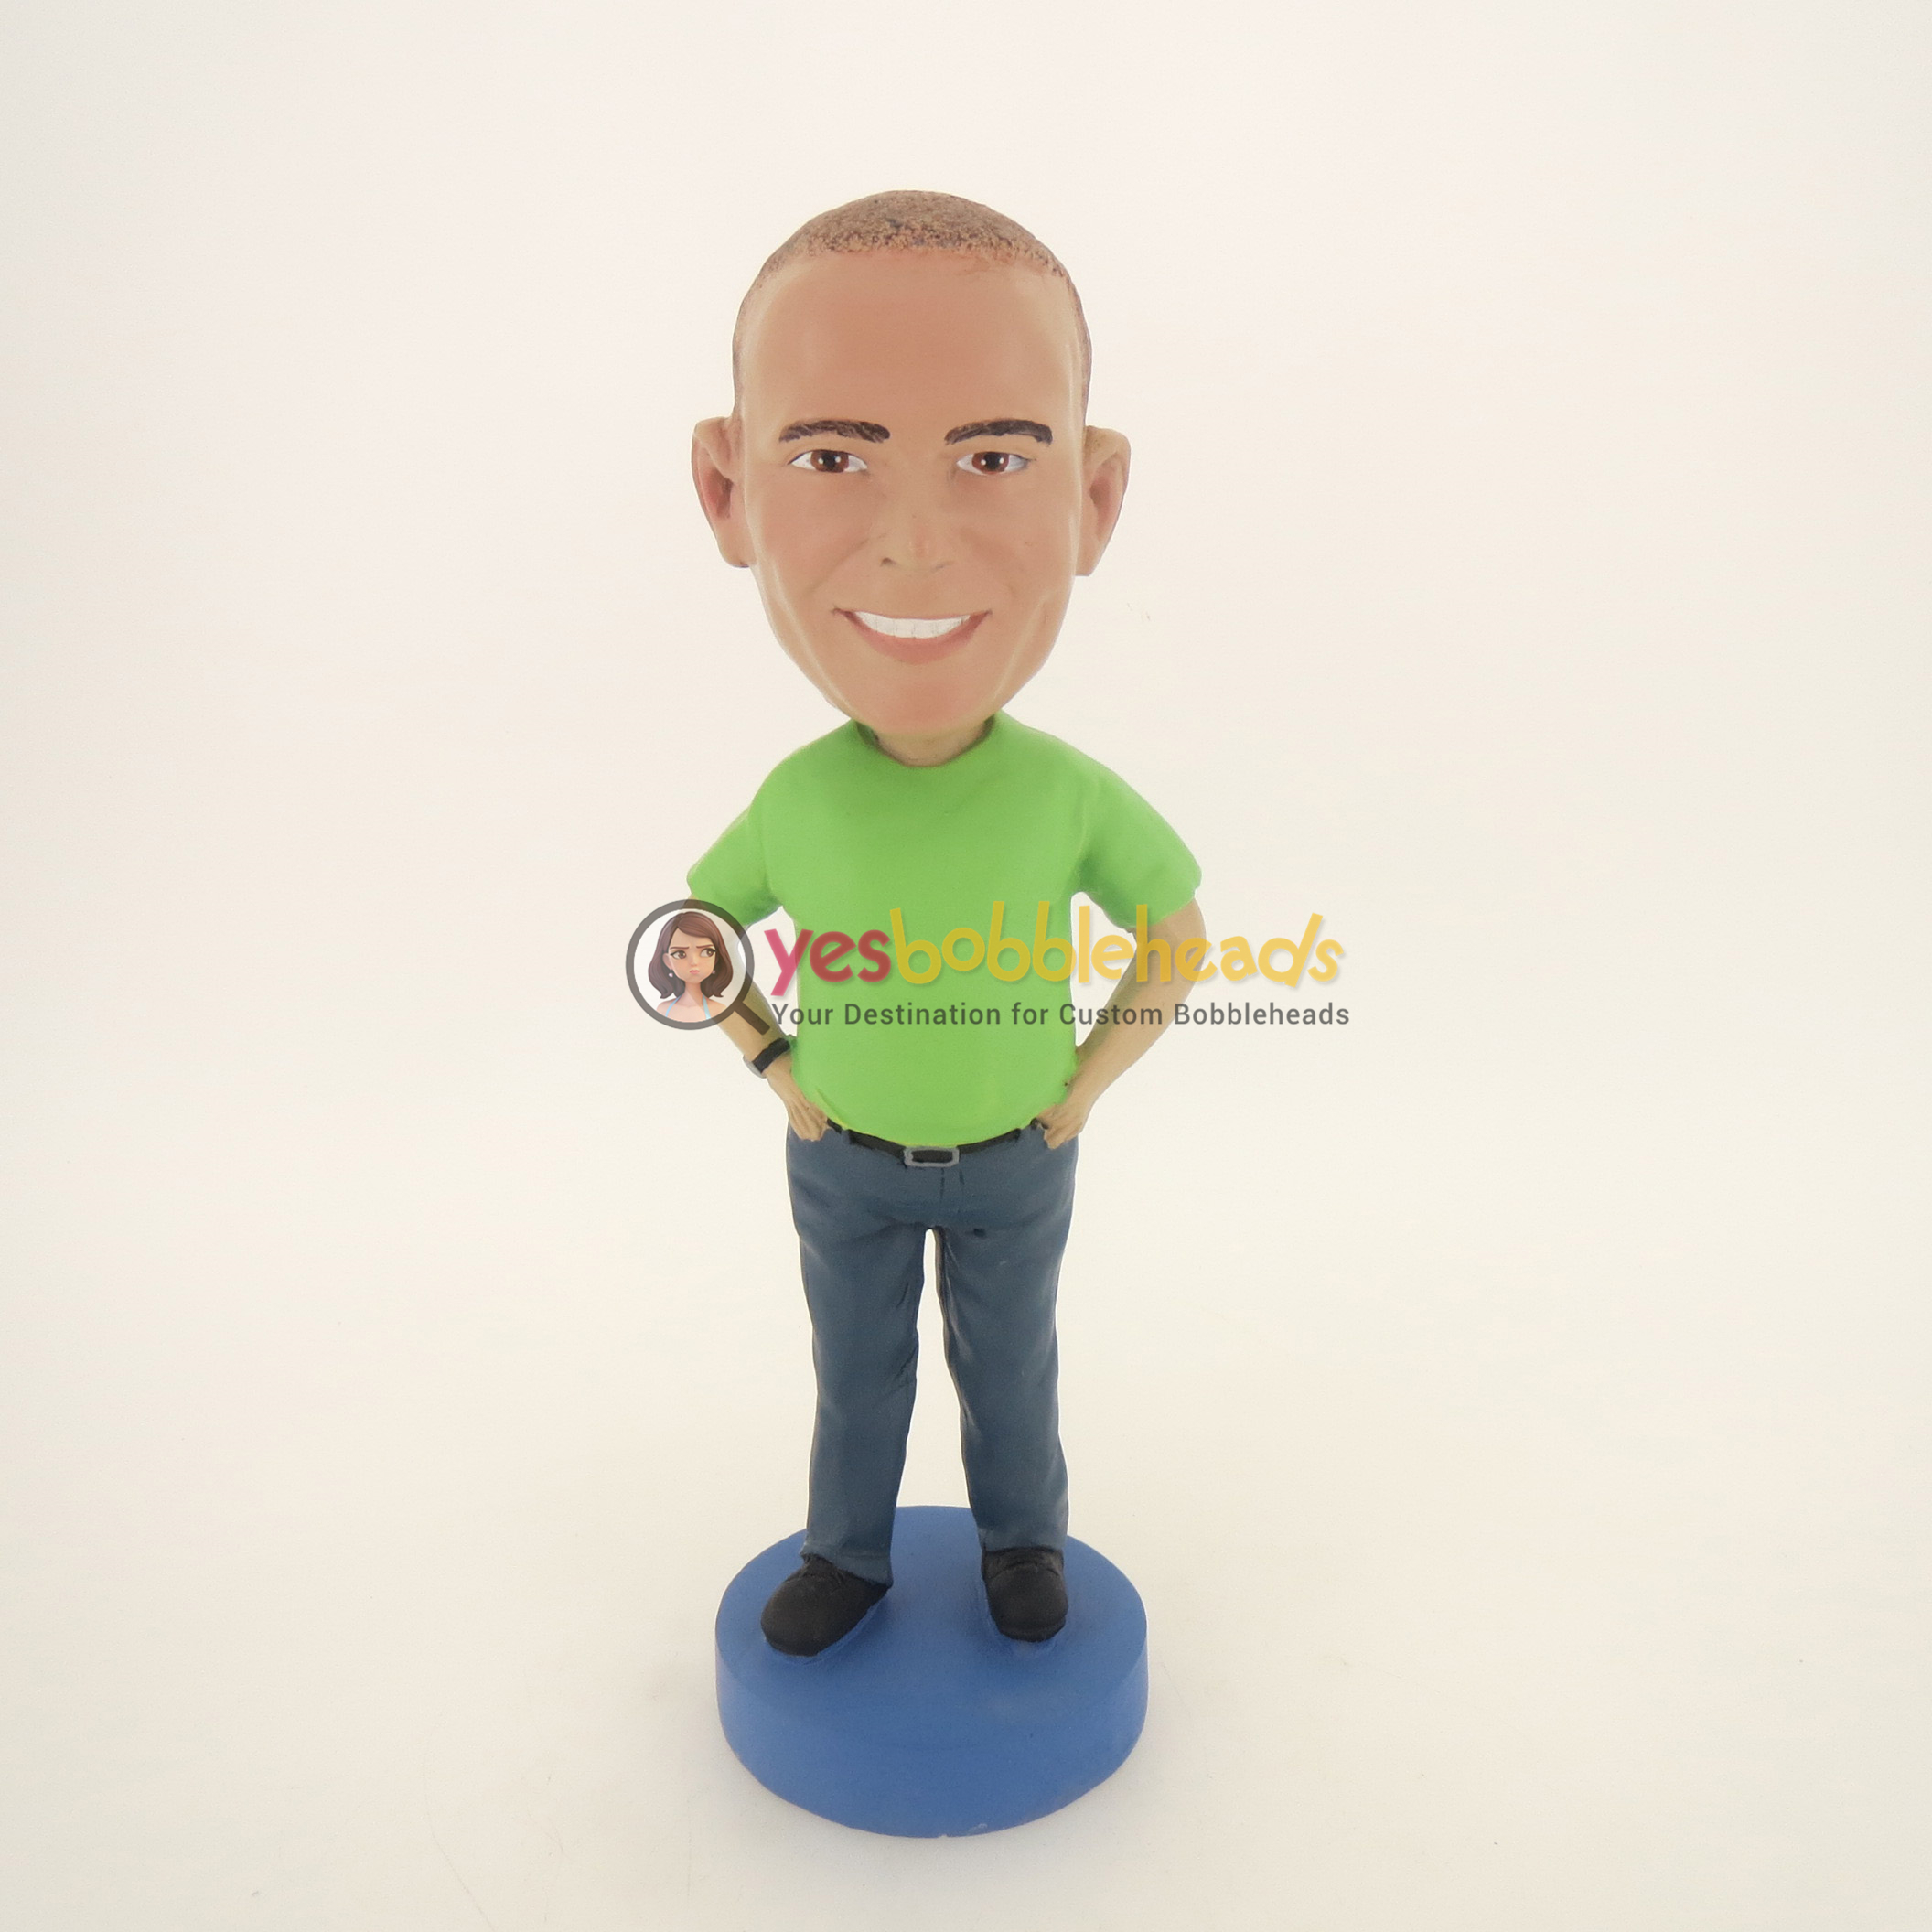 Picture of Custom Bobblehead Doll: Casual Man In Light Green